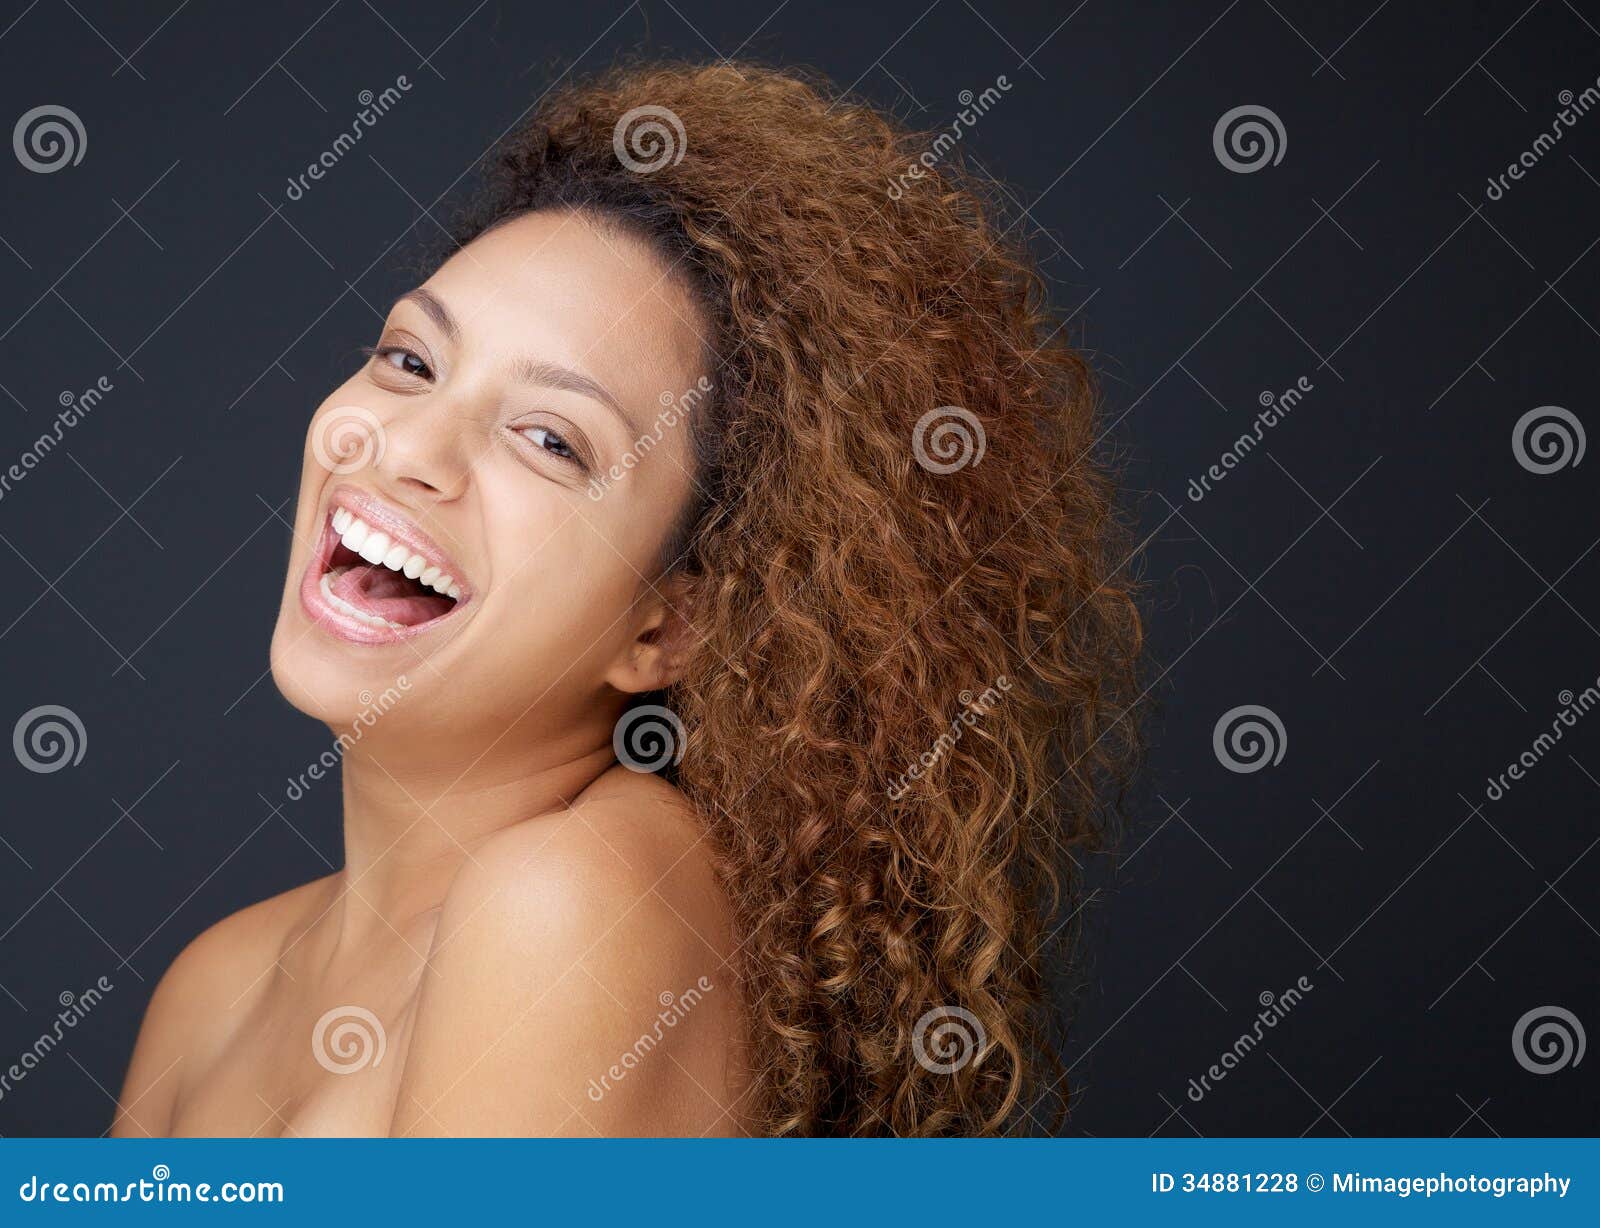 beautiful young woman with naked shoulders laughing